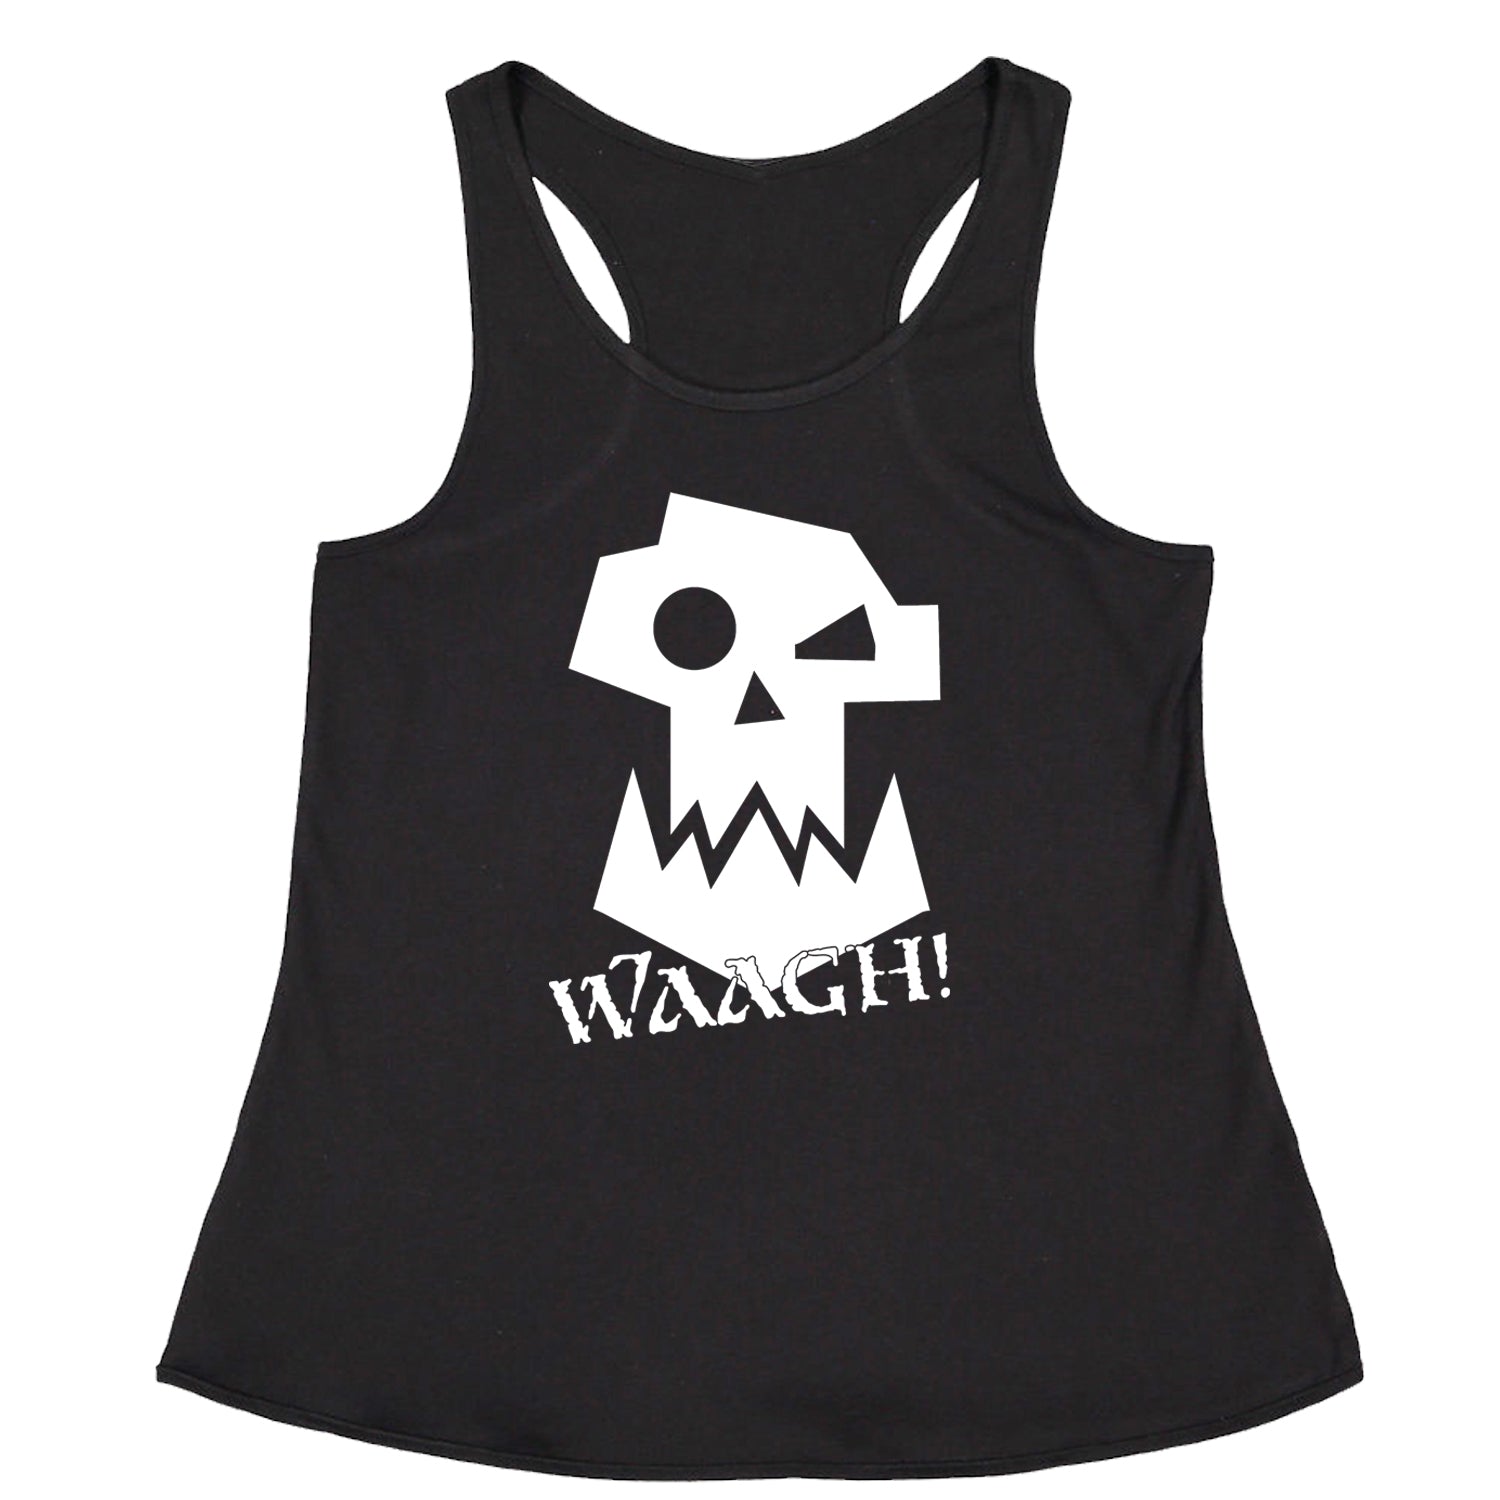 Ork Miniature Tabletop Wargaming Waagh Racerback Tank Top for Women #expressiontees by Expression Tees